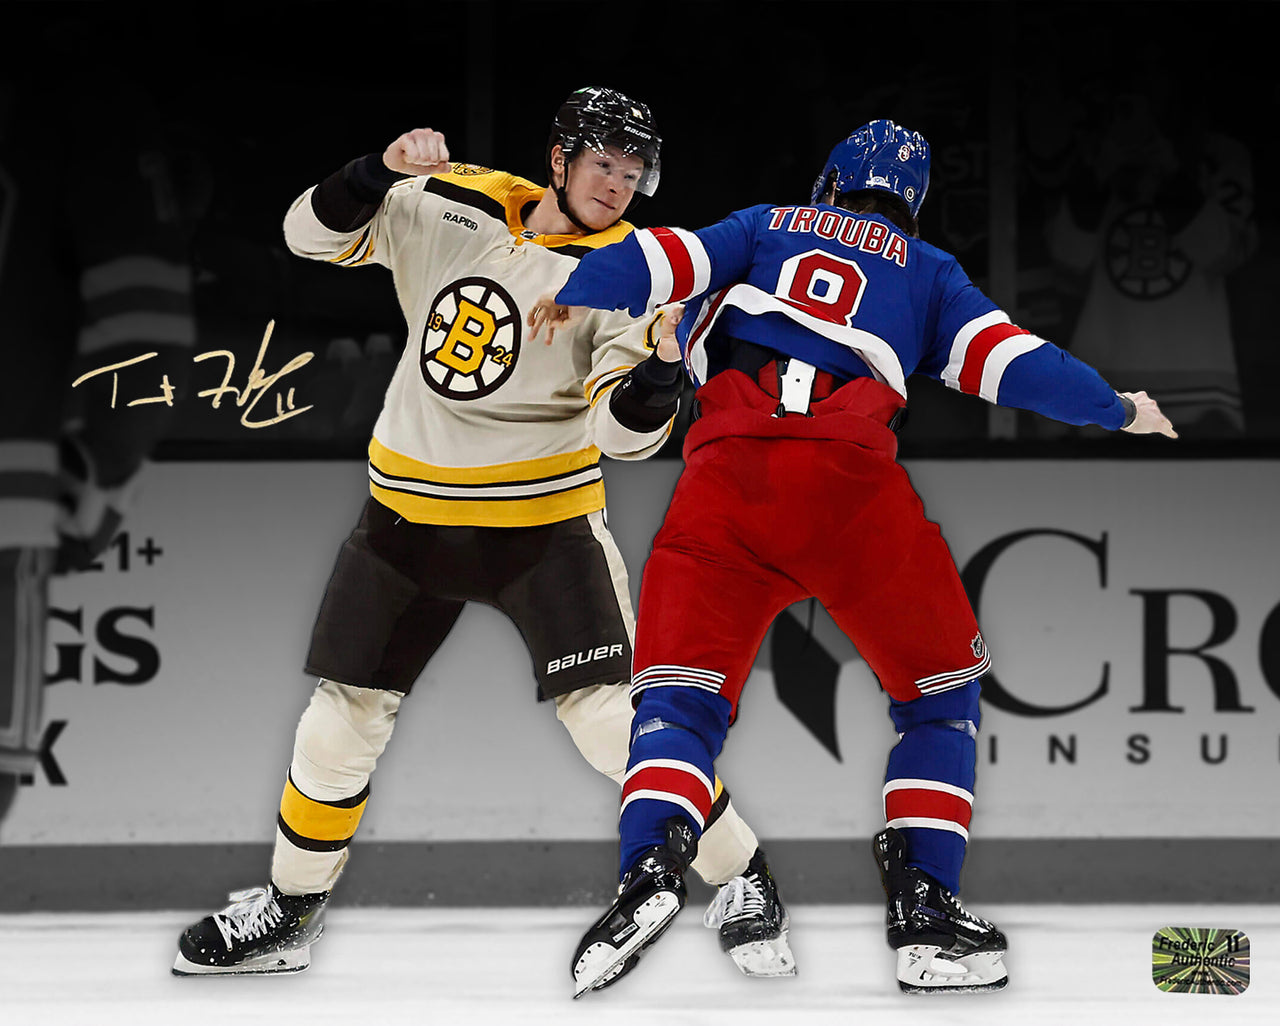 Trent Frederic Fighting Action Boston Bruins Autographed 11" x 14" Hockey Photo